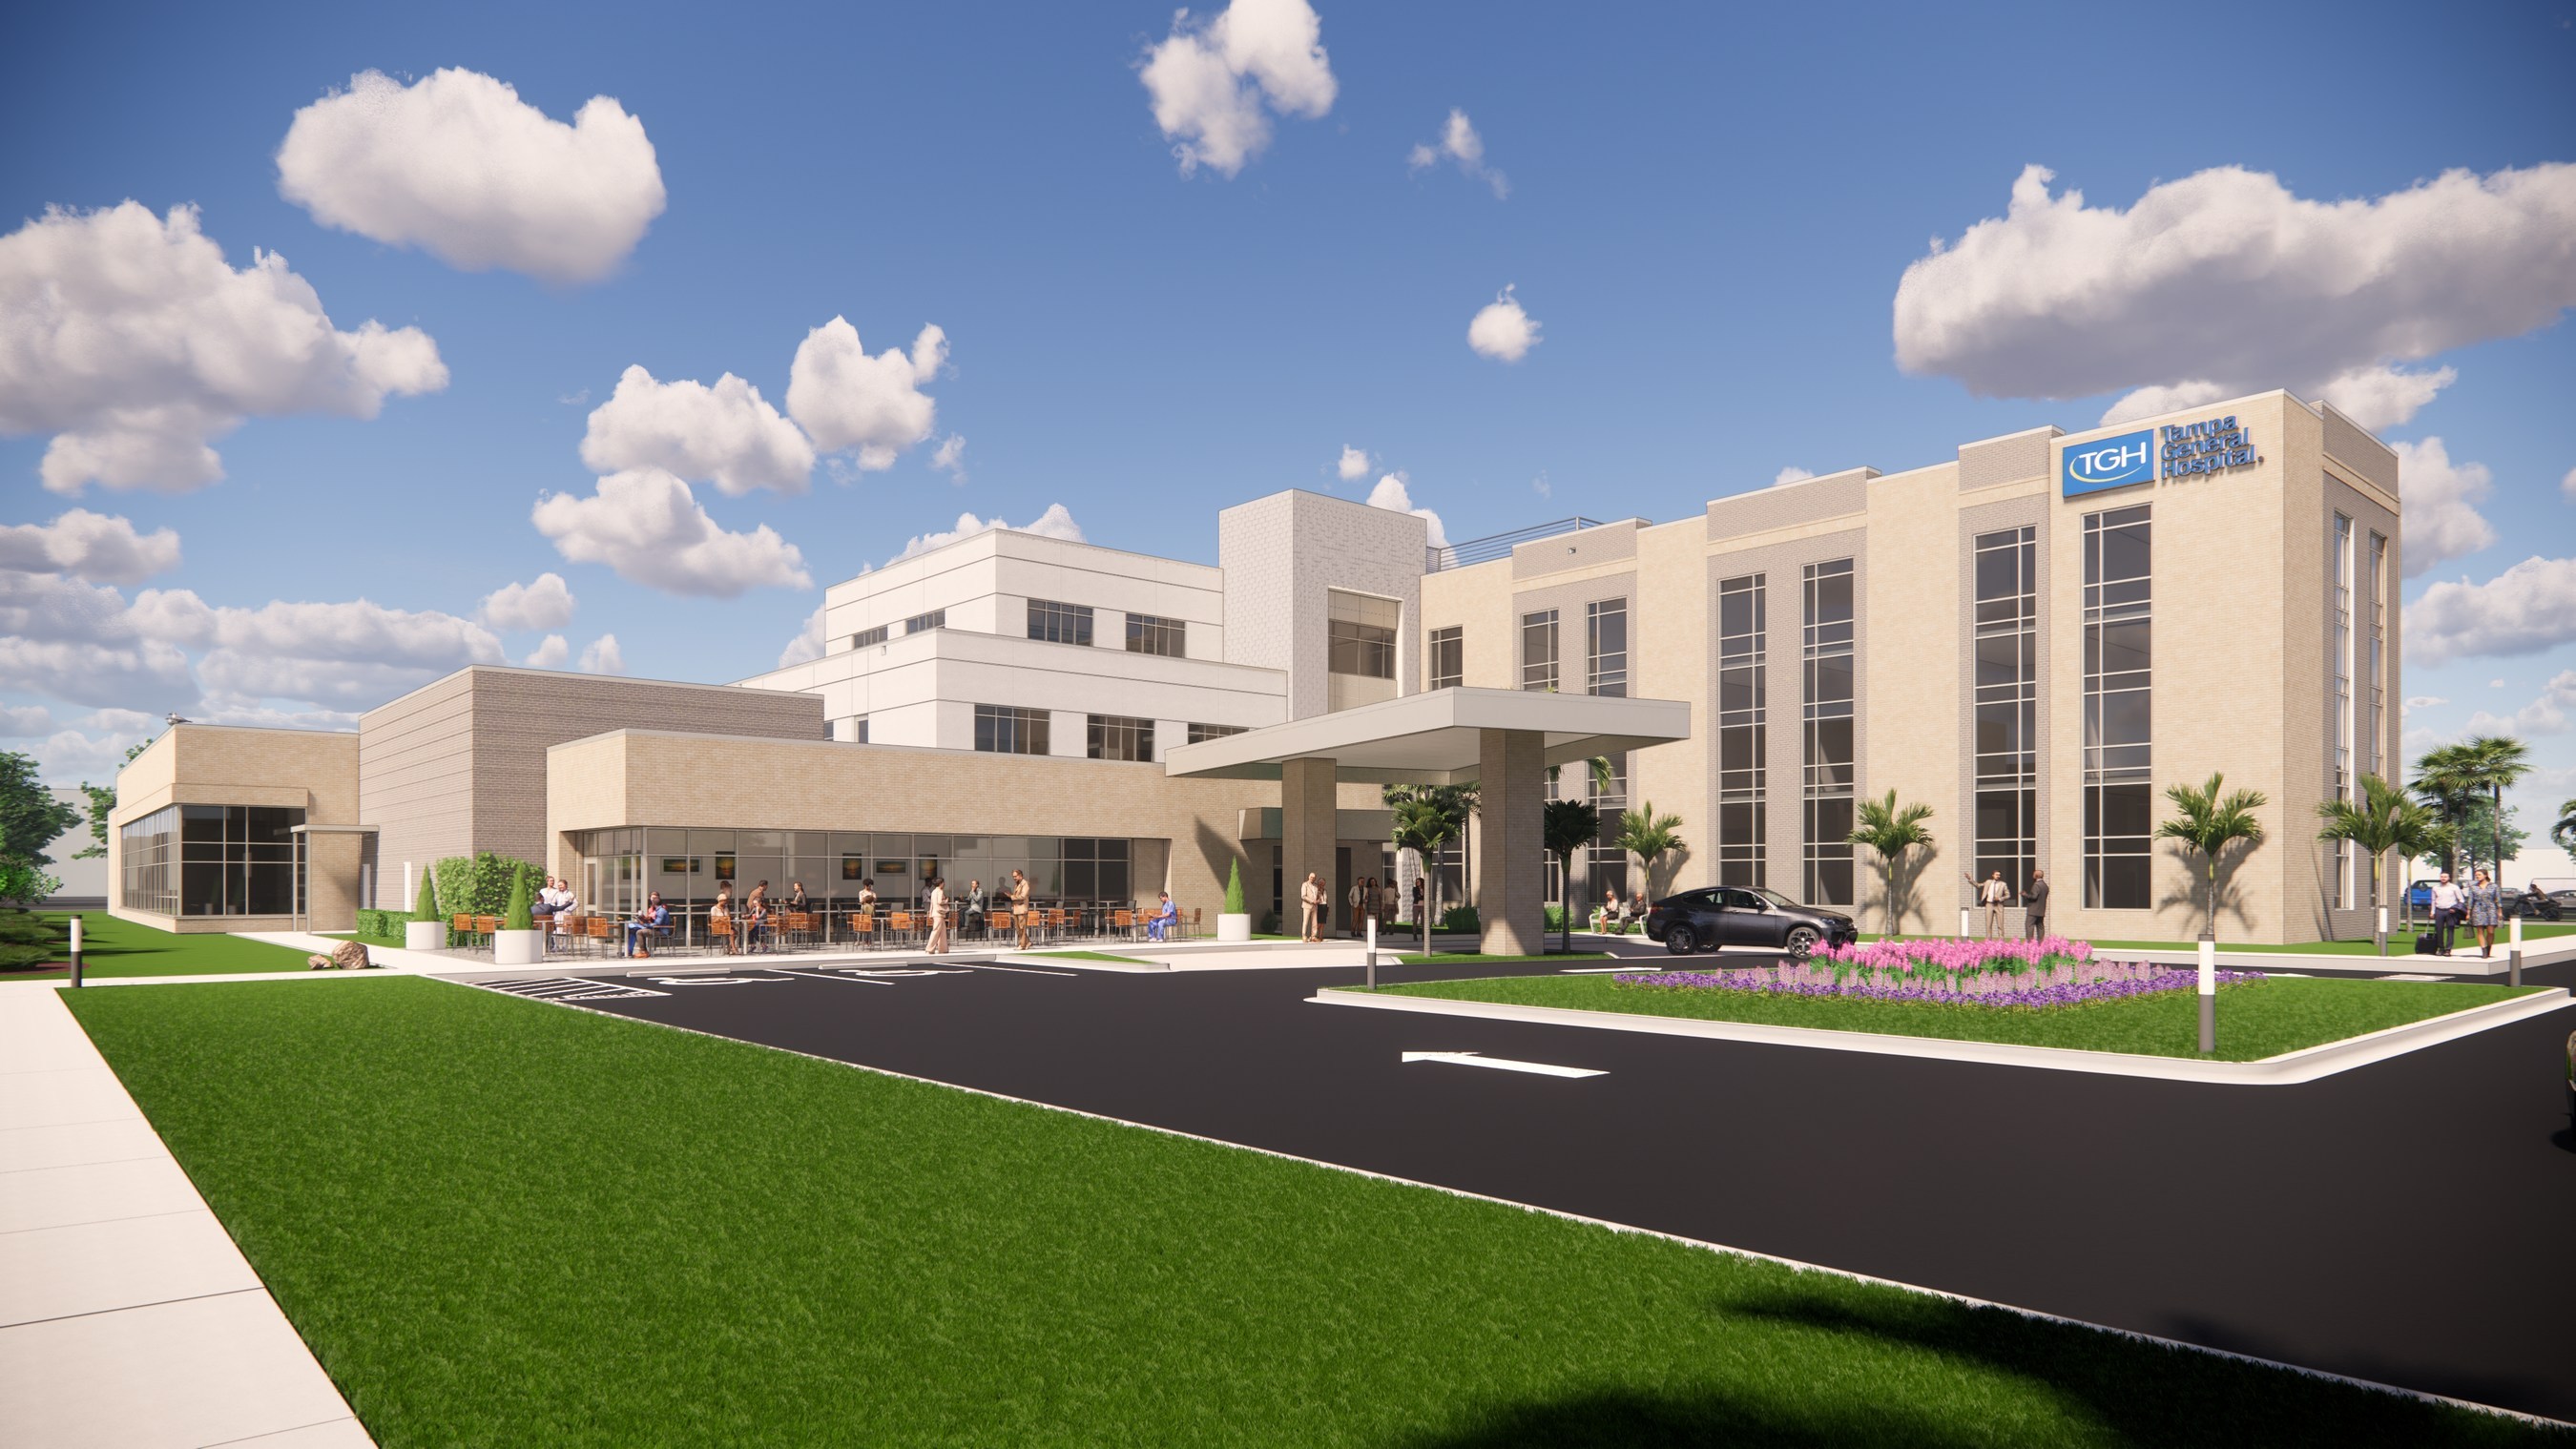 News Release: Anchor Health Properties Celebrates Groundbreaking and